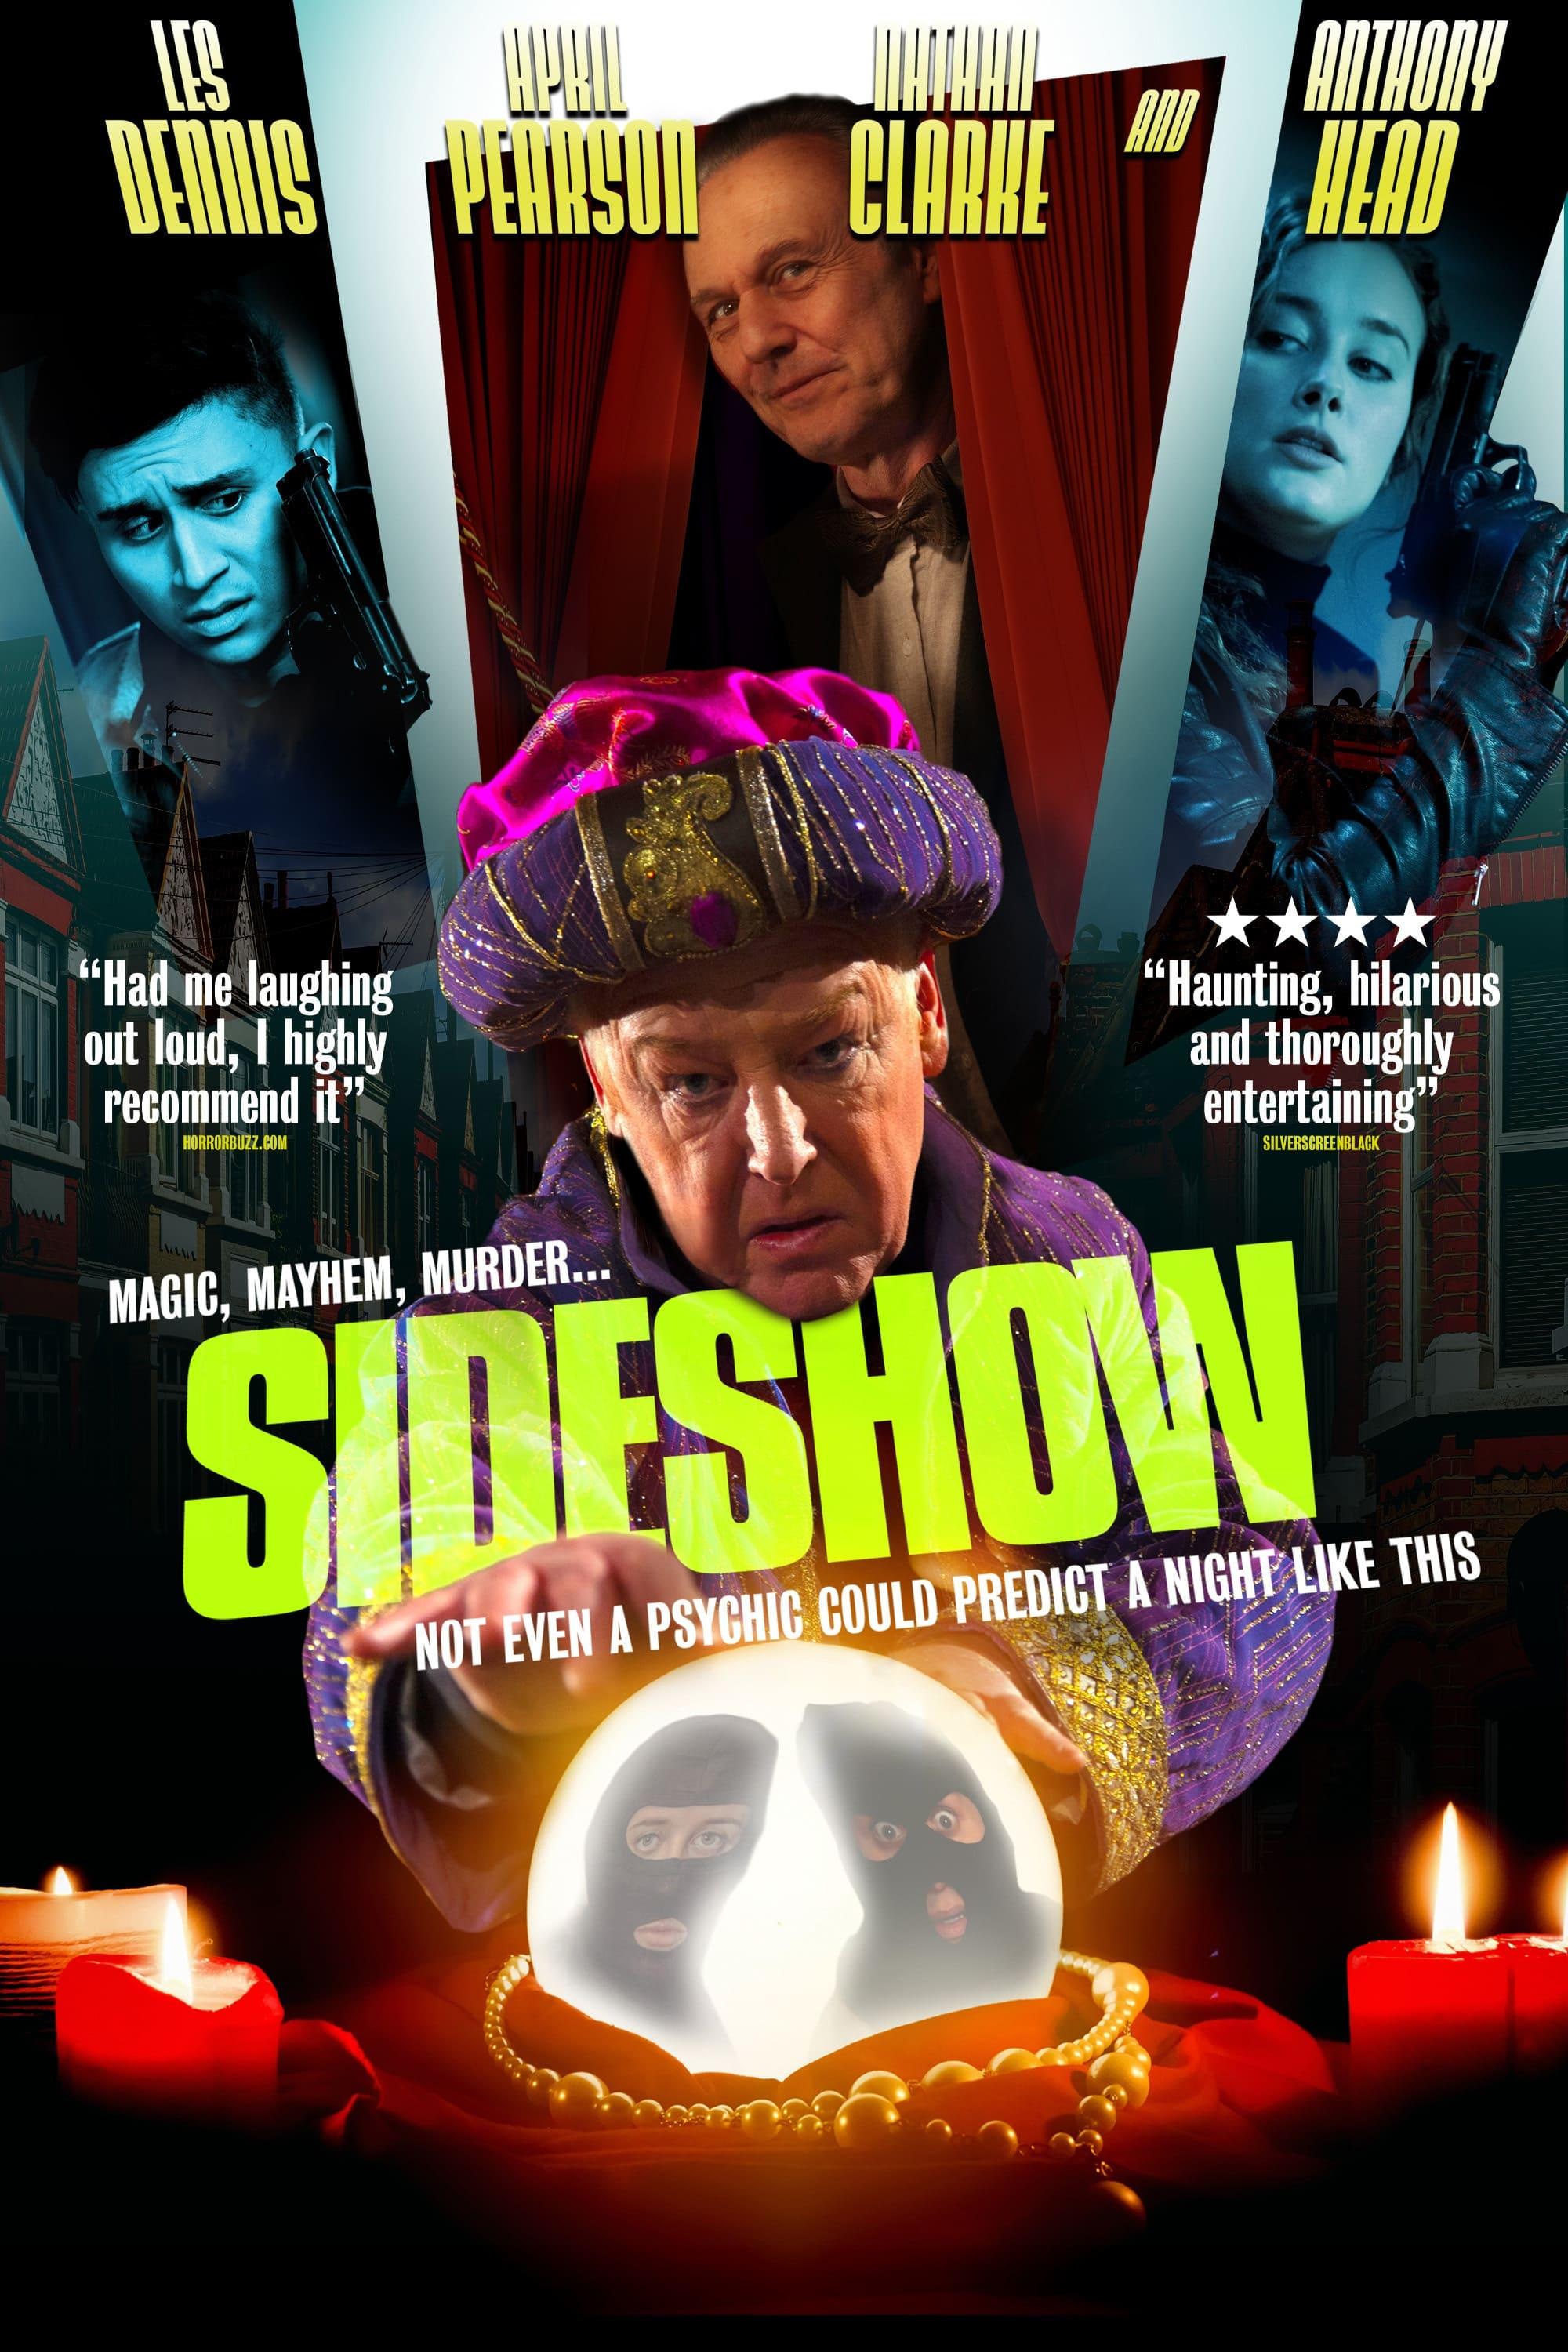 Sideshow poster